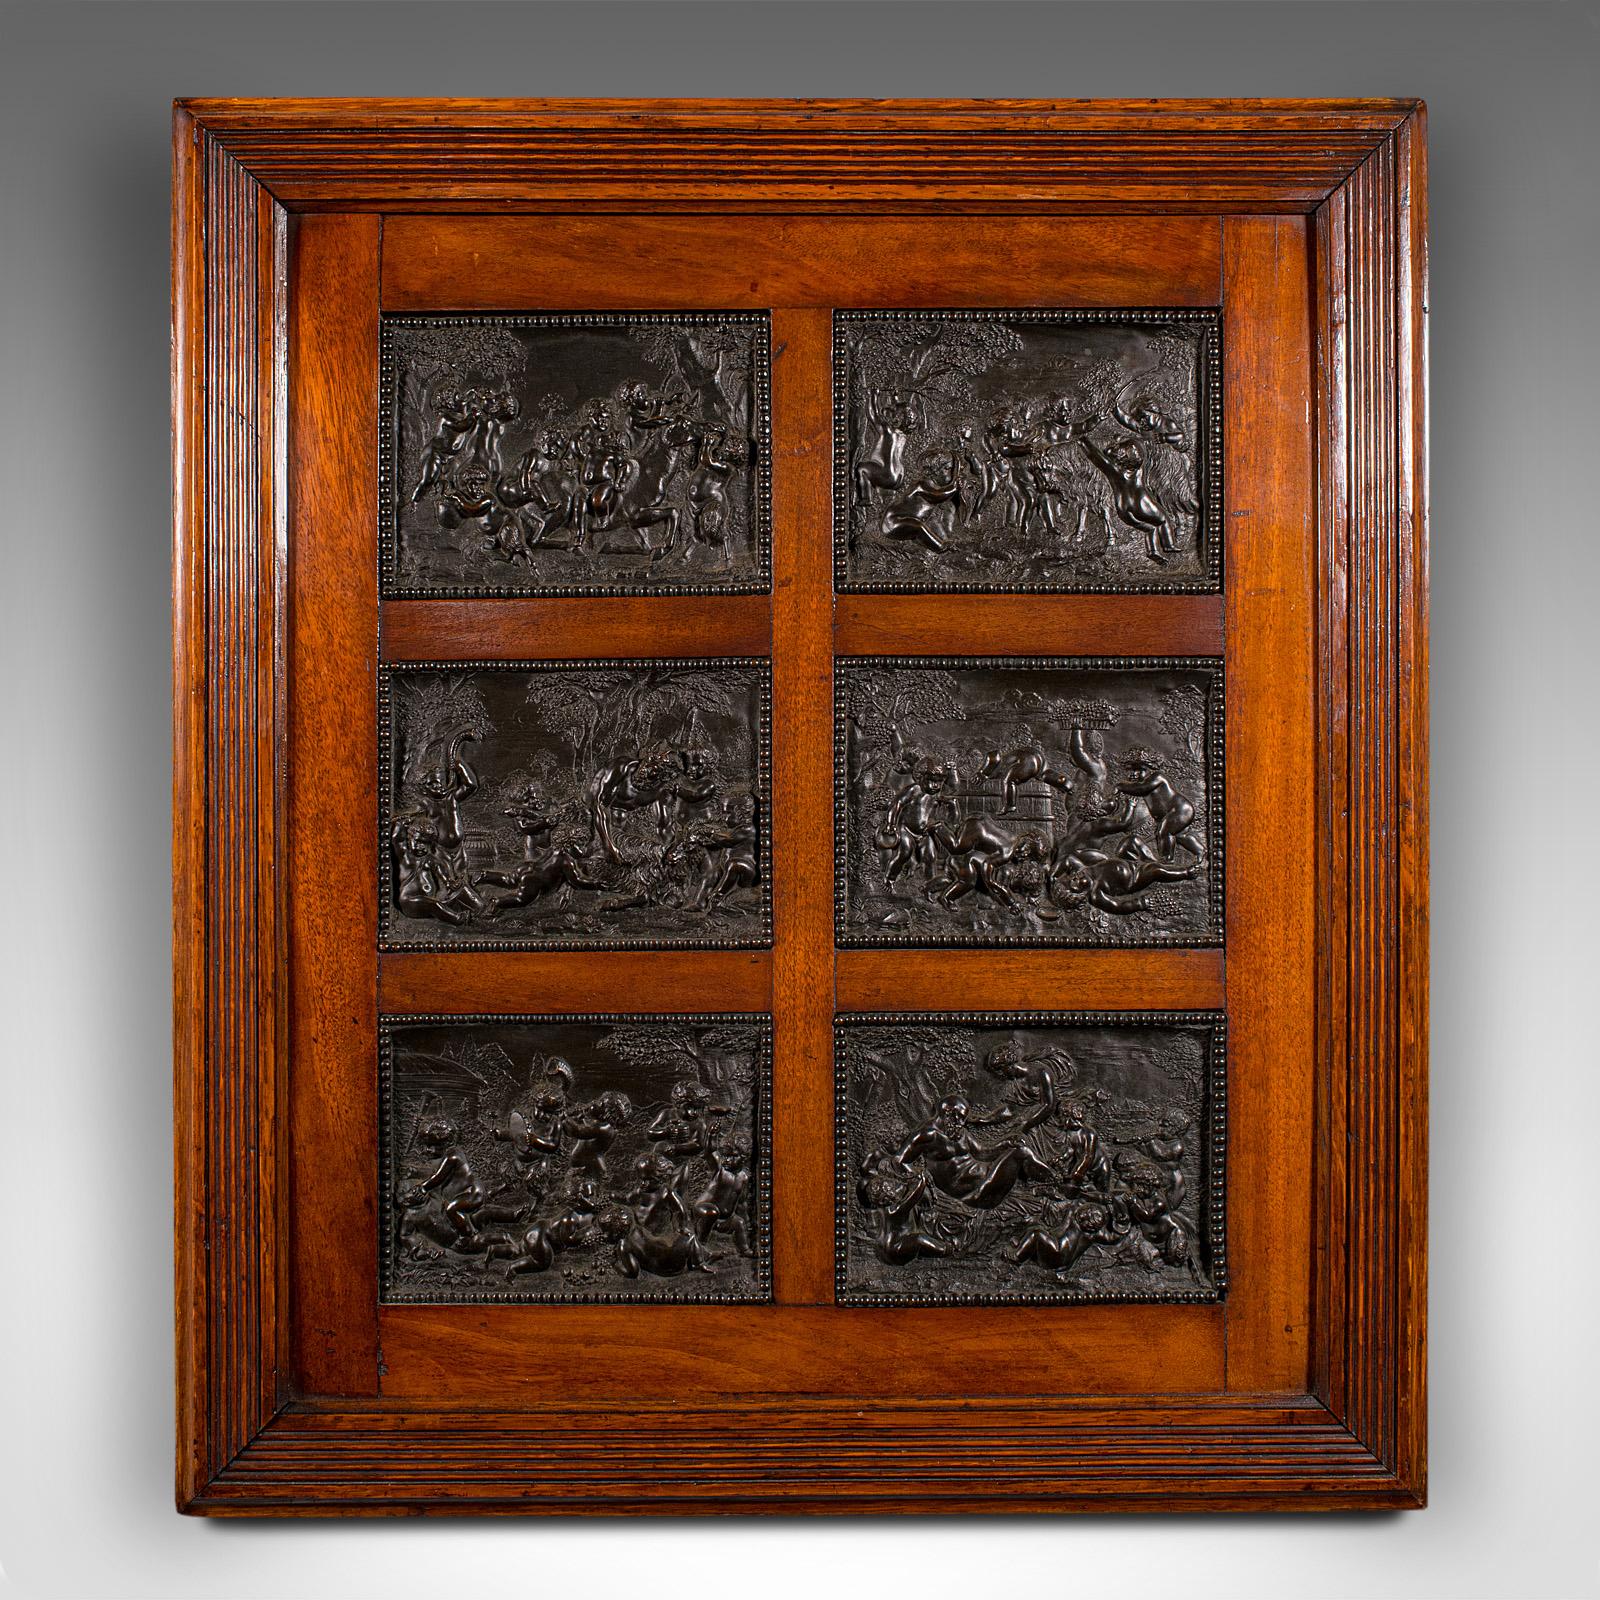 This is an antique framed Bacchanalian Frieze. An Italian, mahogany and bronze Grand Tour relief mount after François Duquesnoy (1594-1646), dating to the early Victorian period, circa 1850.

Delightful 19th century relief work in the manner of